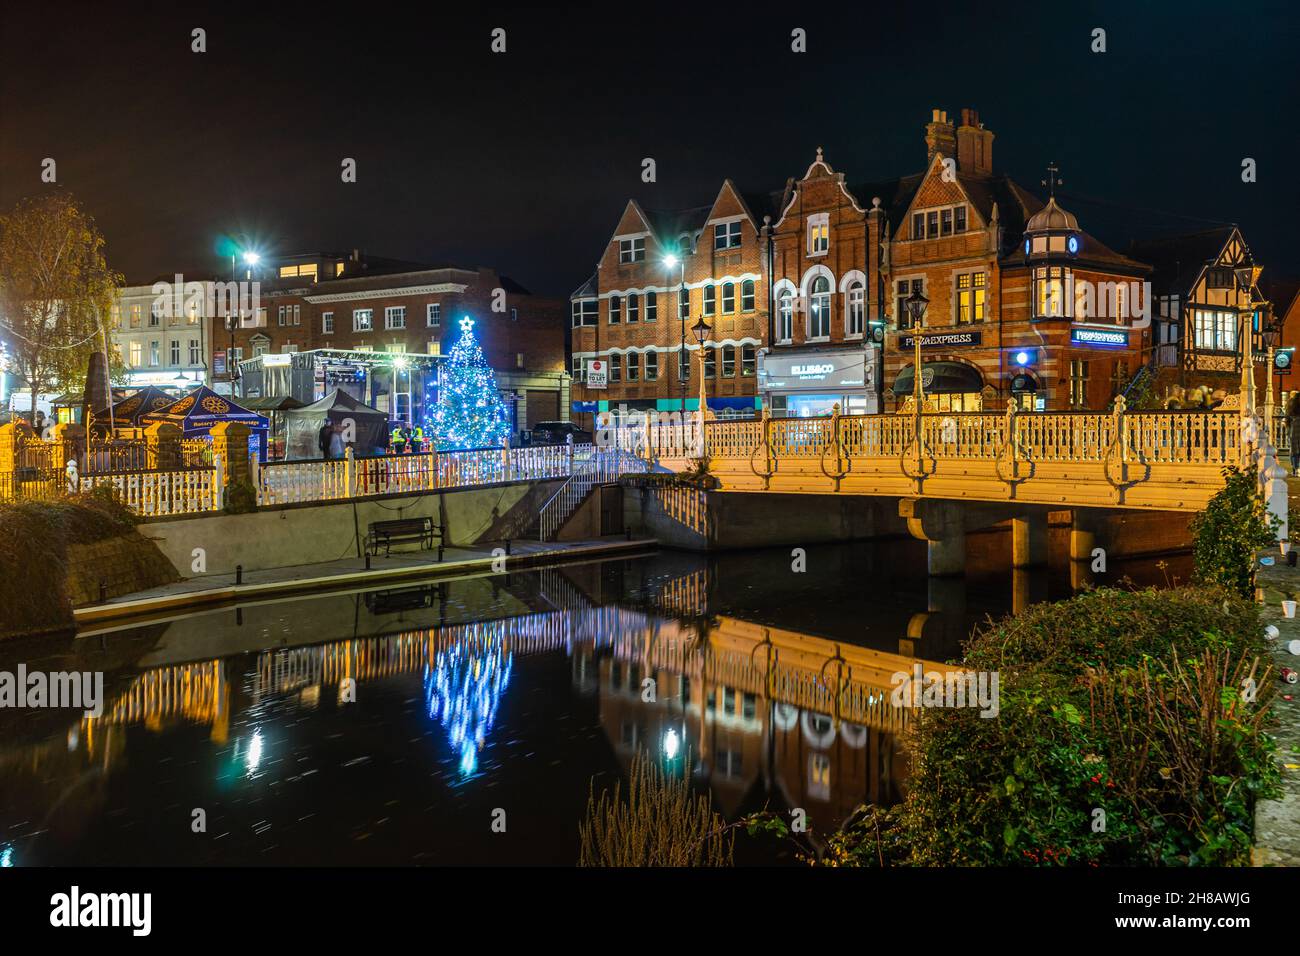 Tonbridge, Kent, England, 28 November, 2021. Crowds gather in Tonbridge, Kent for a street festival along the River Medway to switch on the Christmas lights. No social distancing or concern regarding social distancing as crowds jostle together for the festival. Credit: Sarah Mott/Alamy Live News Stock Photo